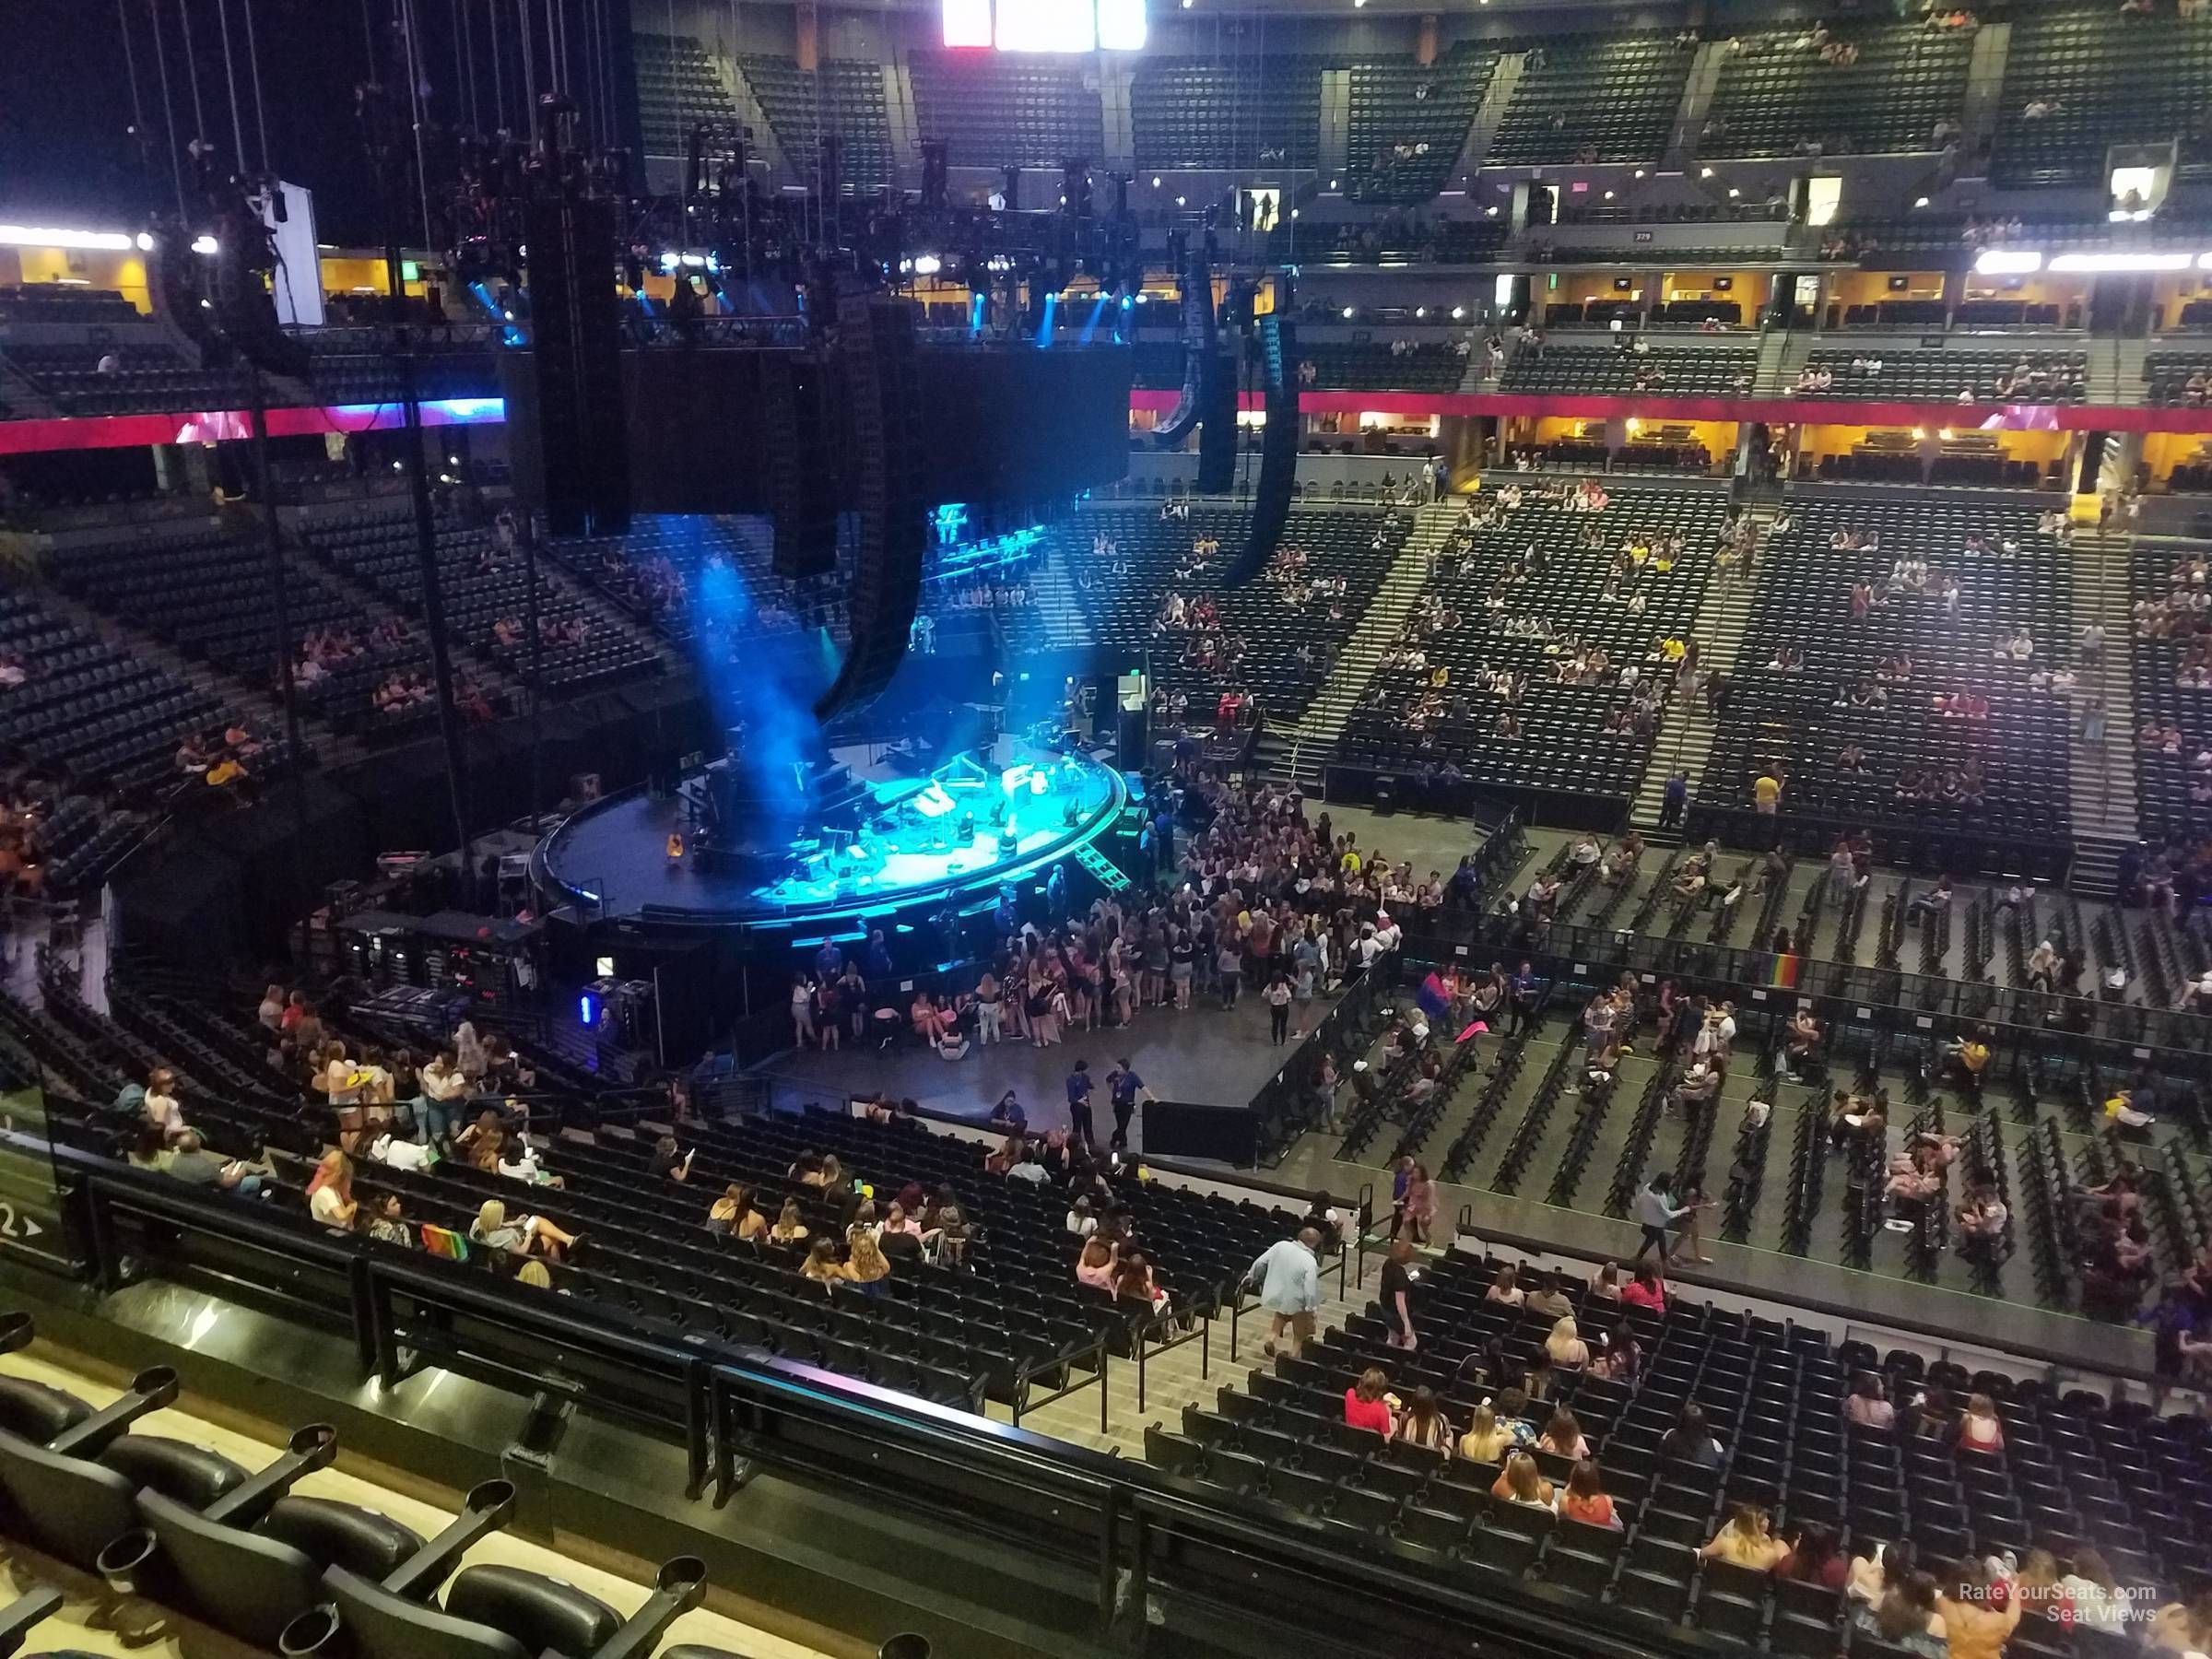 section 232, row 4 seat view  for concert - ball arena